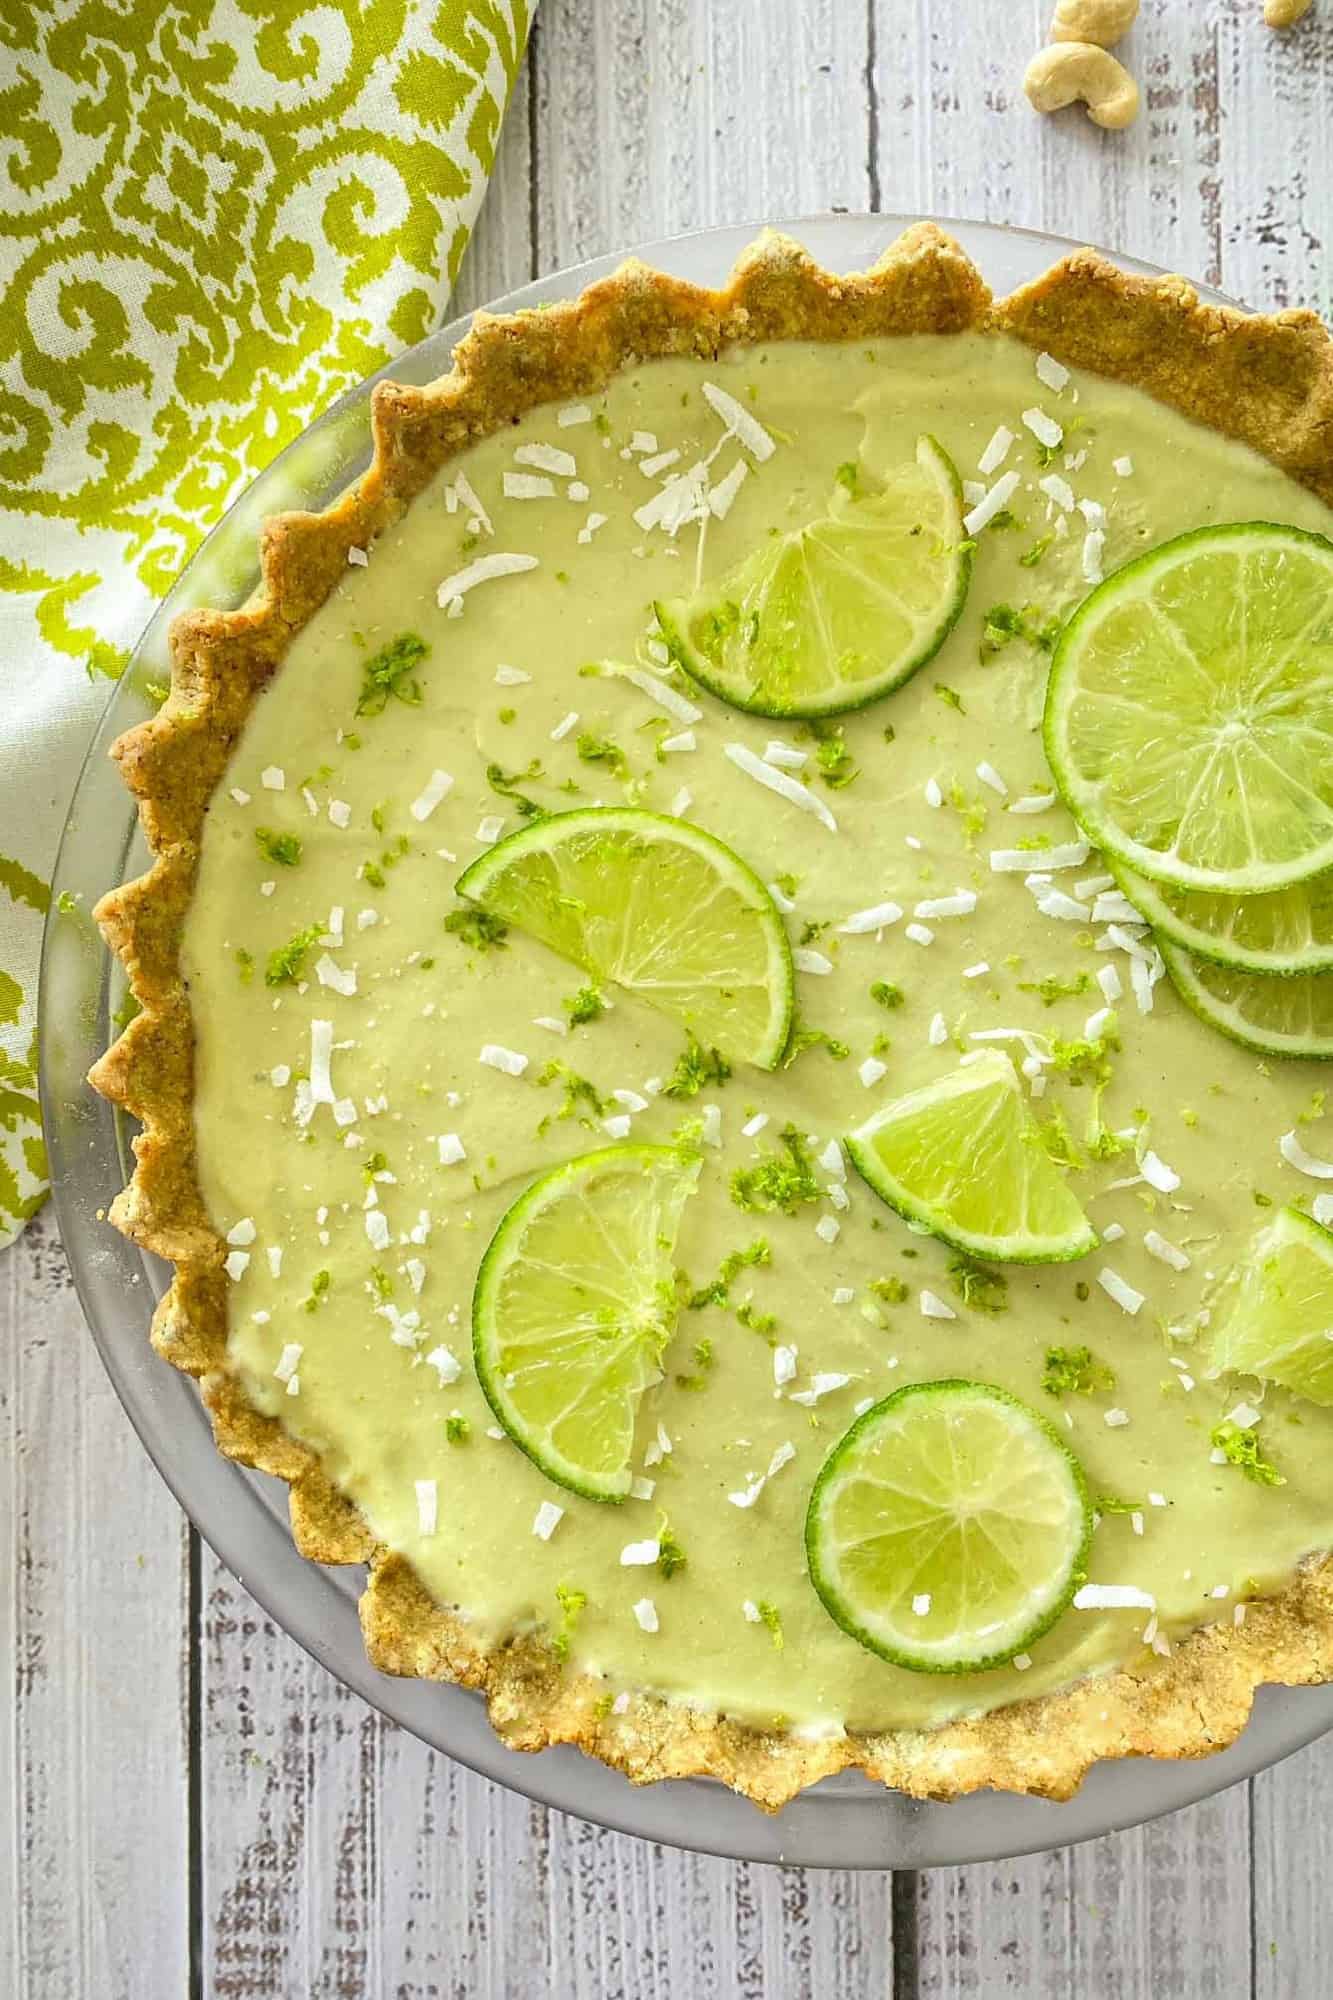 Overhead view of key lime pie with lime zest and coconut shreds on top.